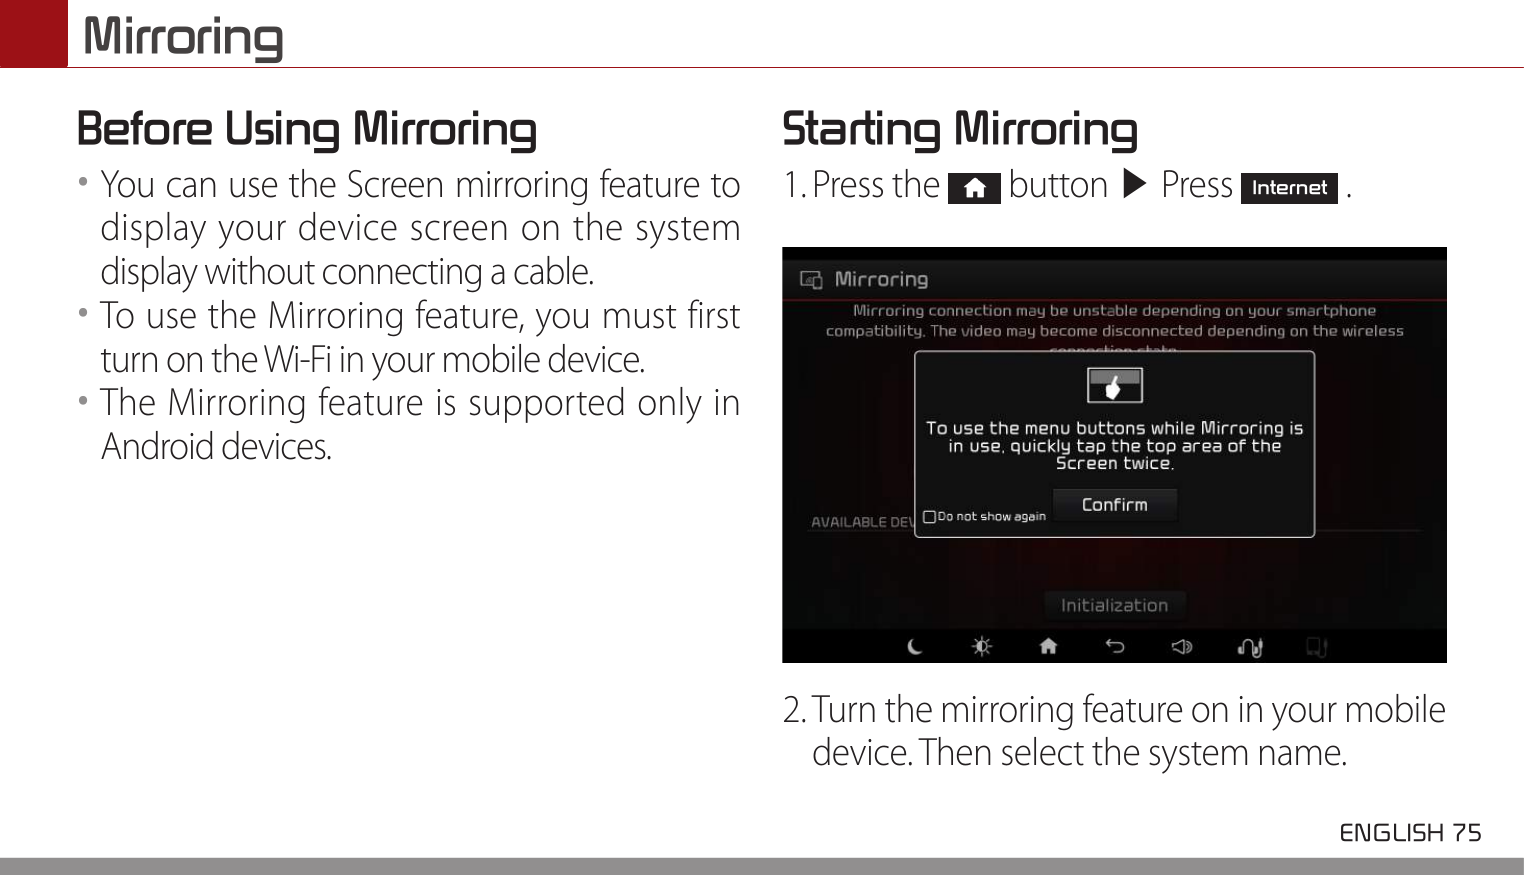  ENGLISH 75 MirroringBefore Using Mirroring••You can use the Screen mirroring feature to display your device screen on the system display without connecting a cable.••To use the Mirroring feature, you must first turn on the Wi-Fi in your mobile device. ••The Mirroring feature is supported only in Android devices.Starting Mirroring1. Press the   button ▶ Press Internet .2. Turn the mirroring feature on in your mobile device. Then select the system name.